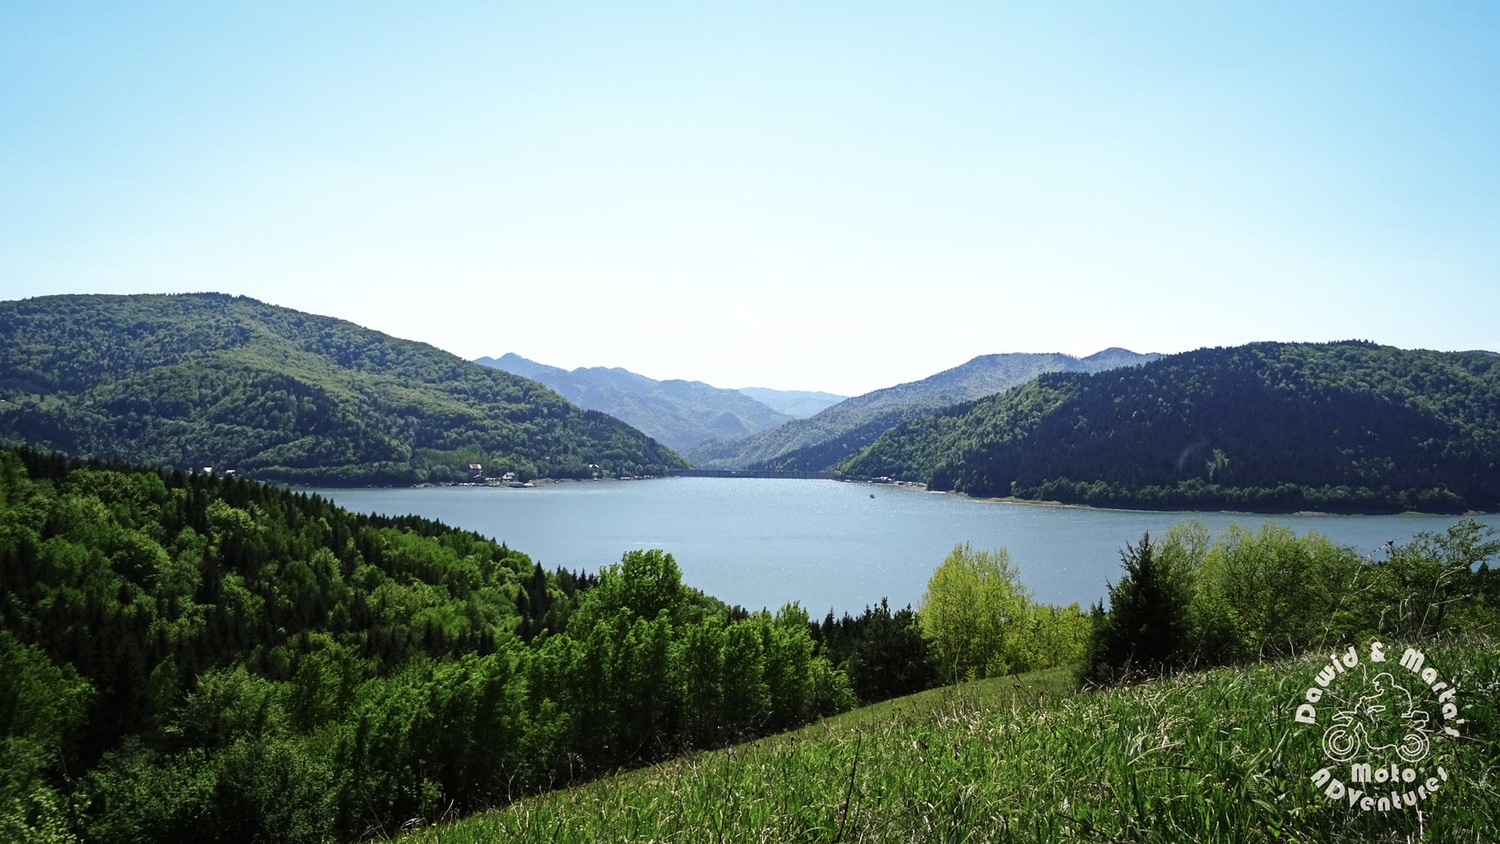 viewpoint on the Bicaz Lake, located on a small hill between Potoci and Ruginesti